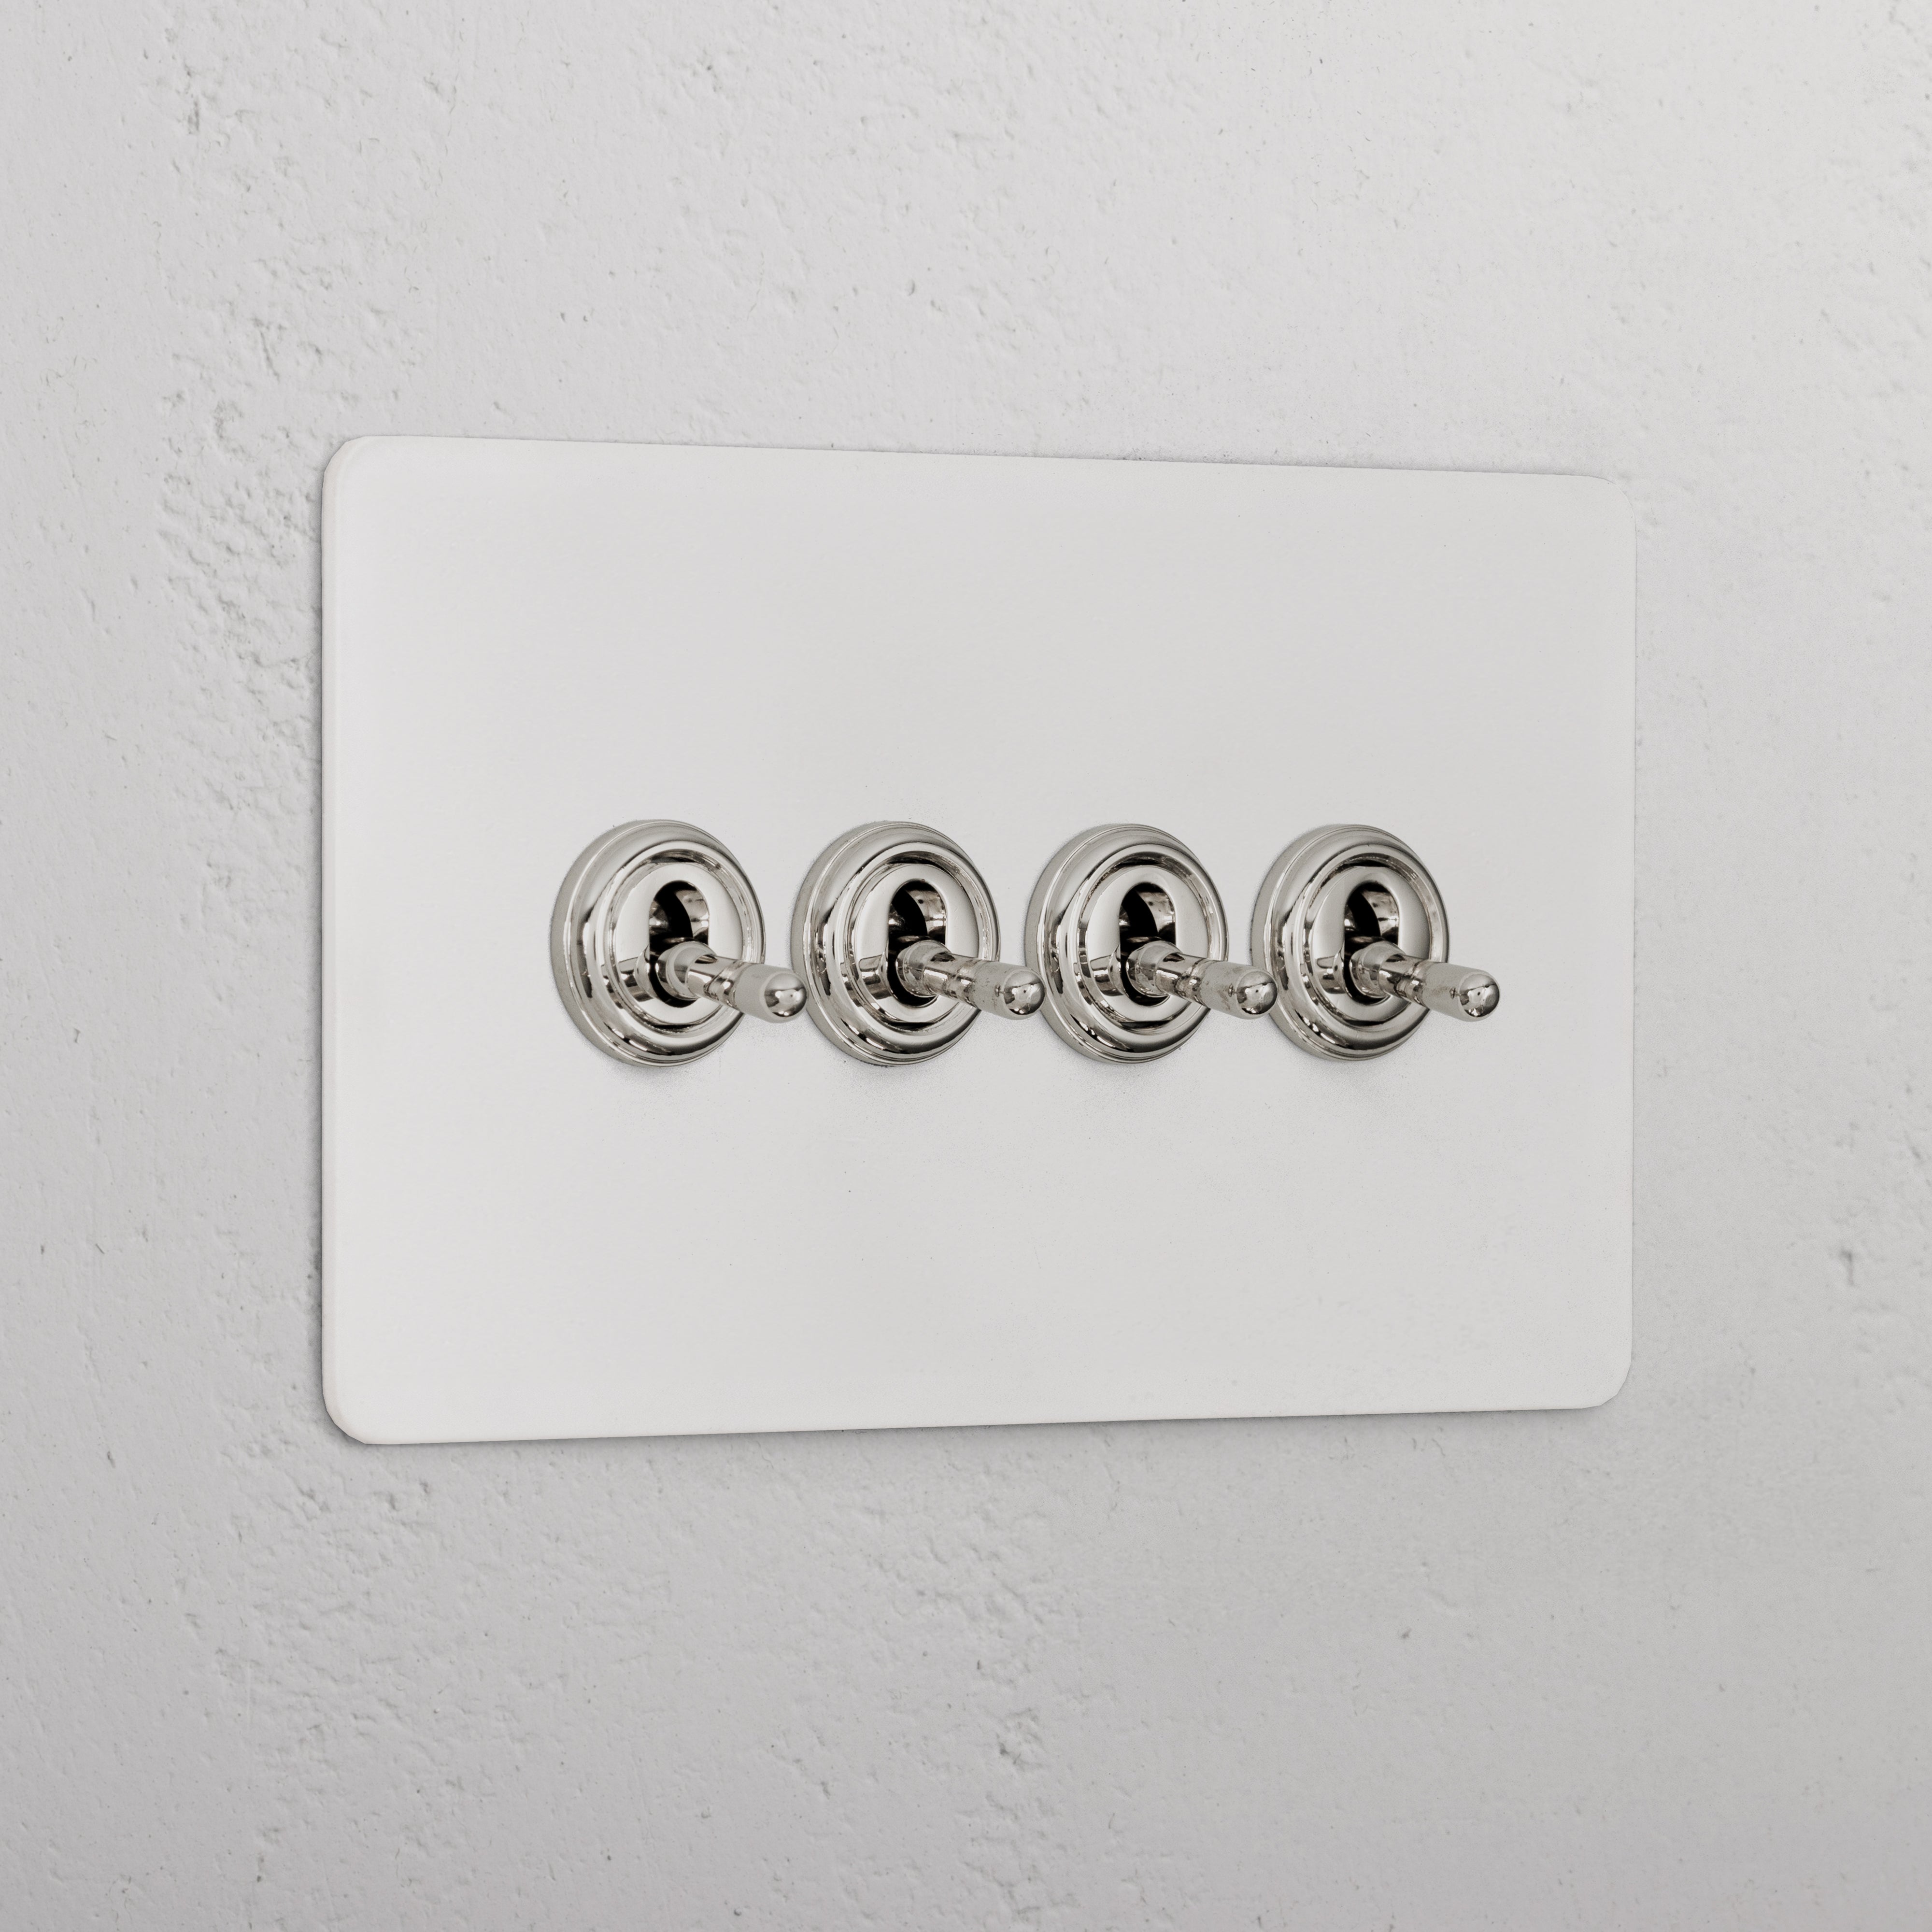 4G Two Way Toggle Switch - Paintable Polished Nickel